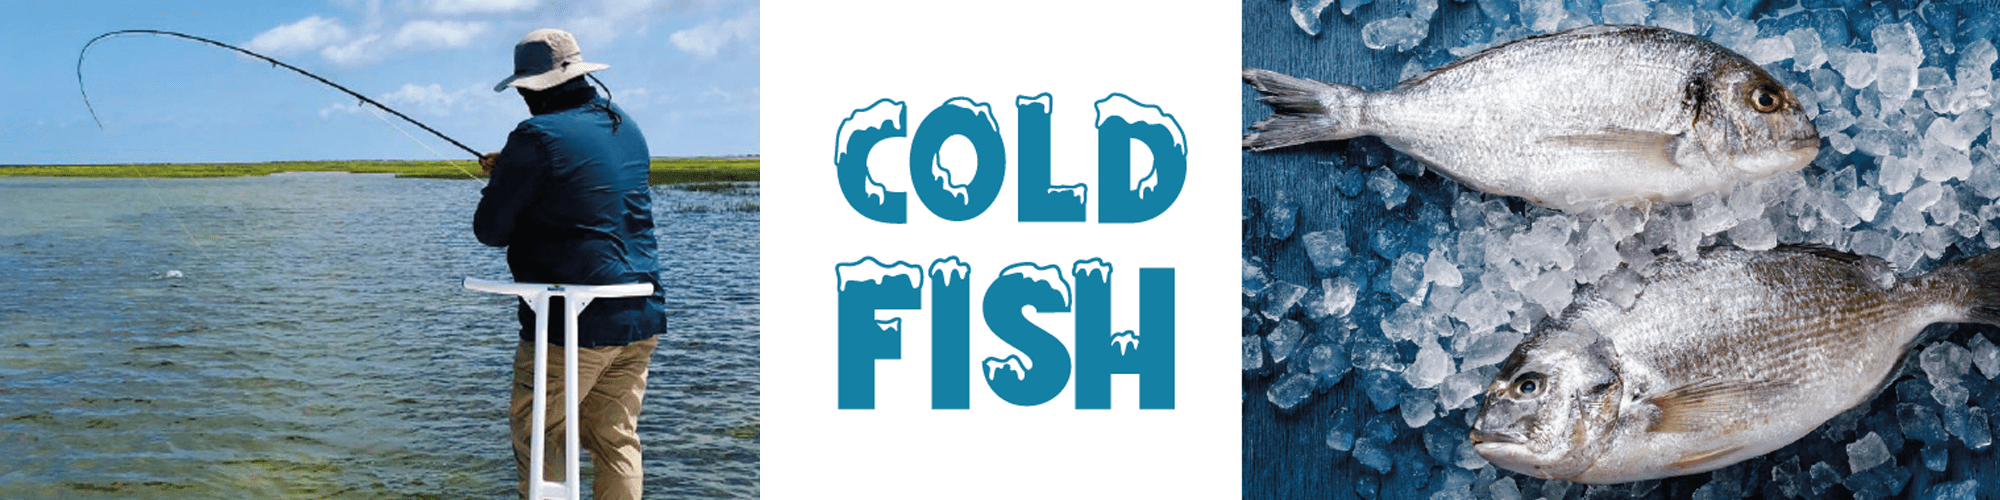 COLD FISH | The Reserve at St. Charles Bay